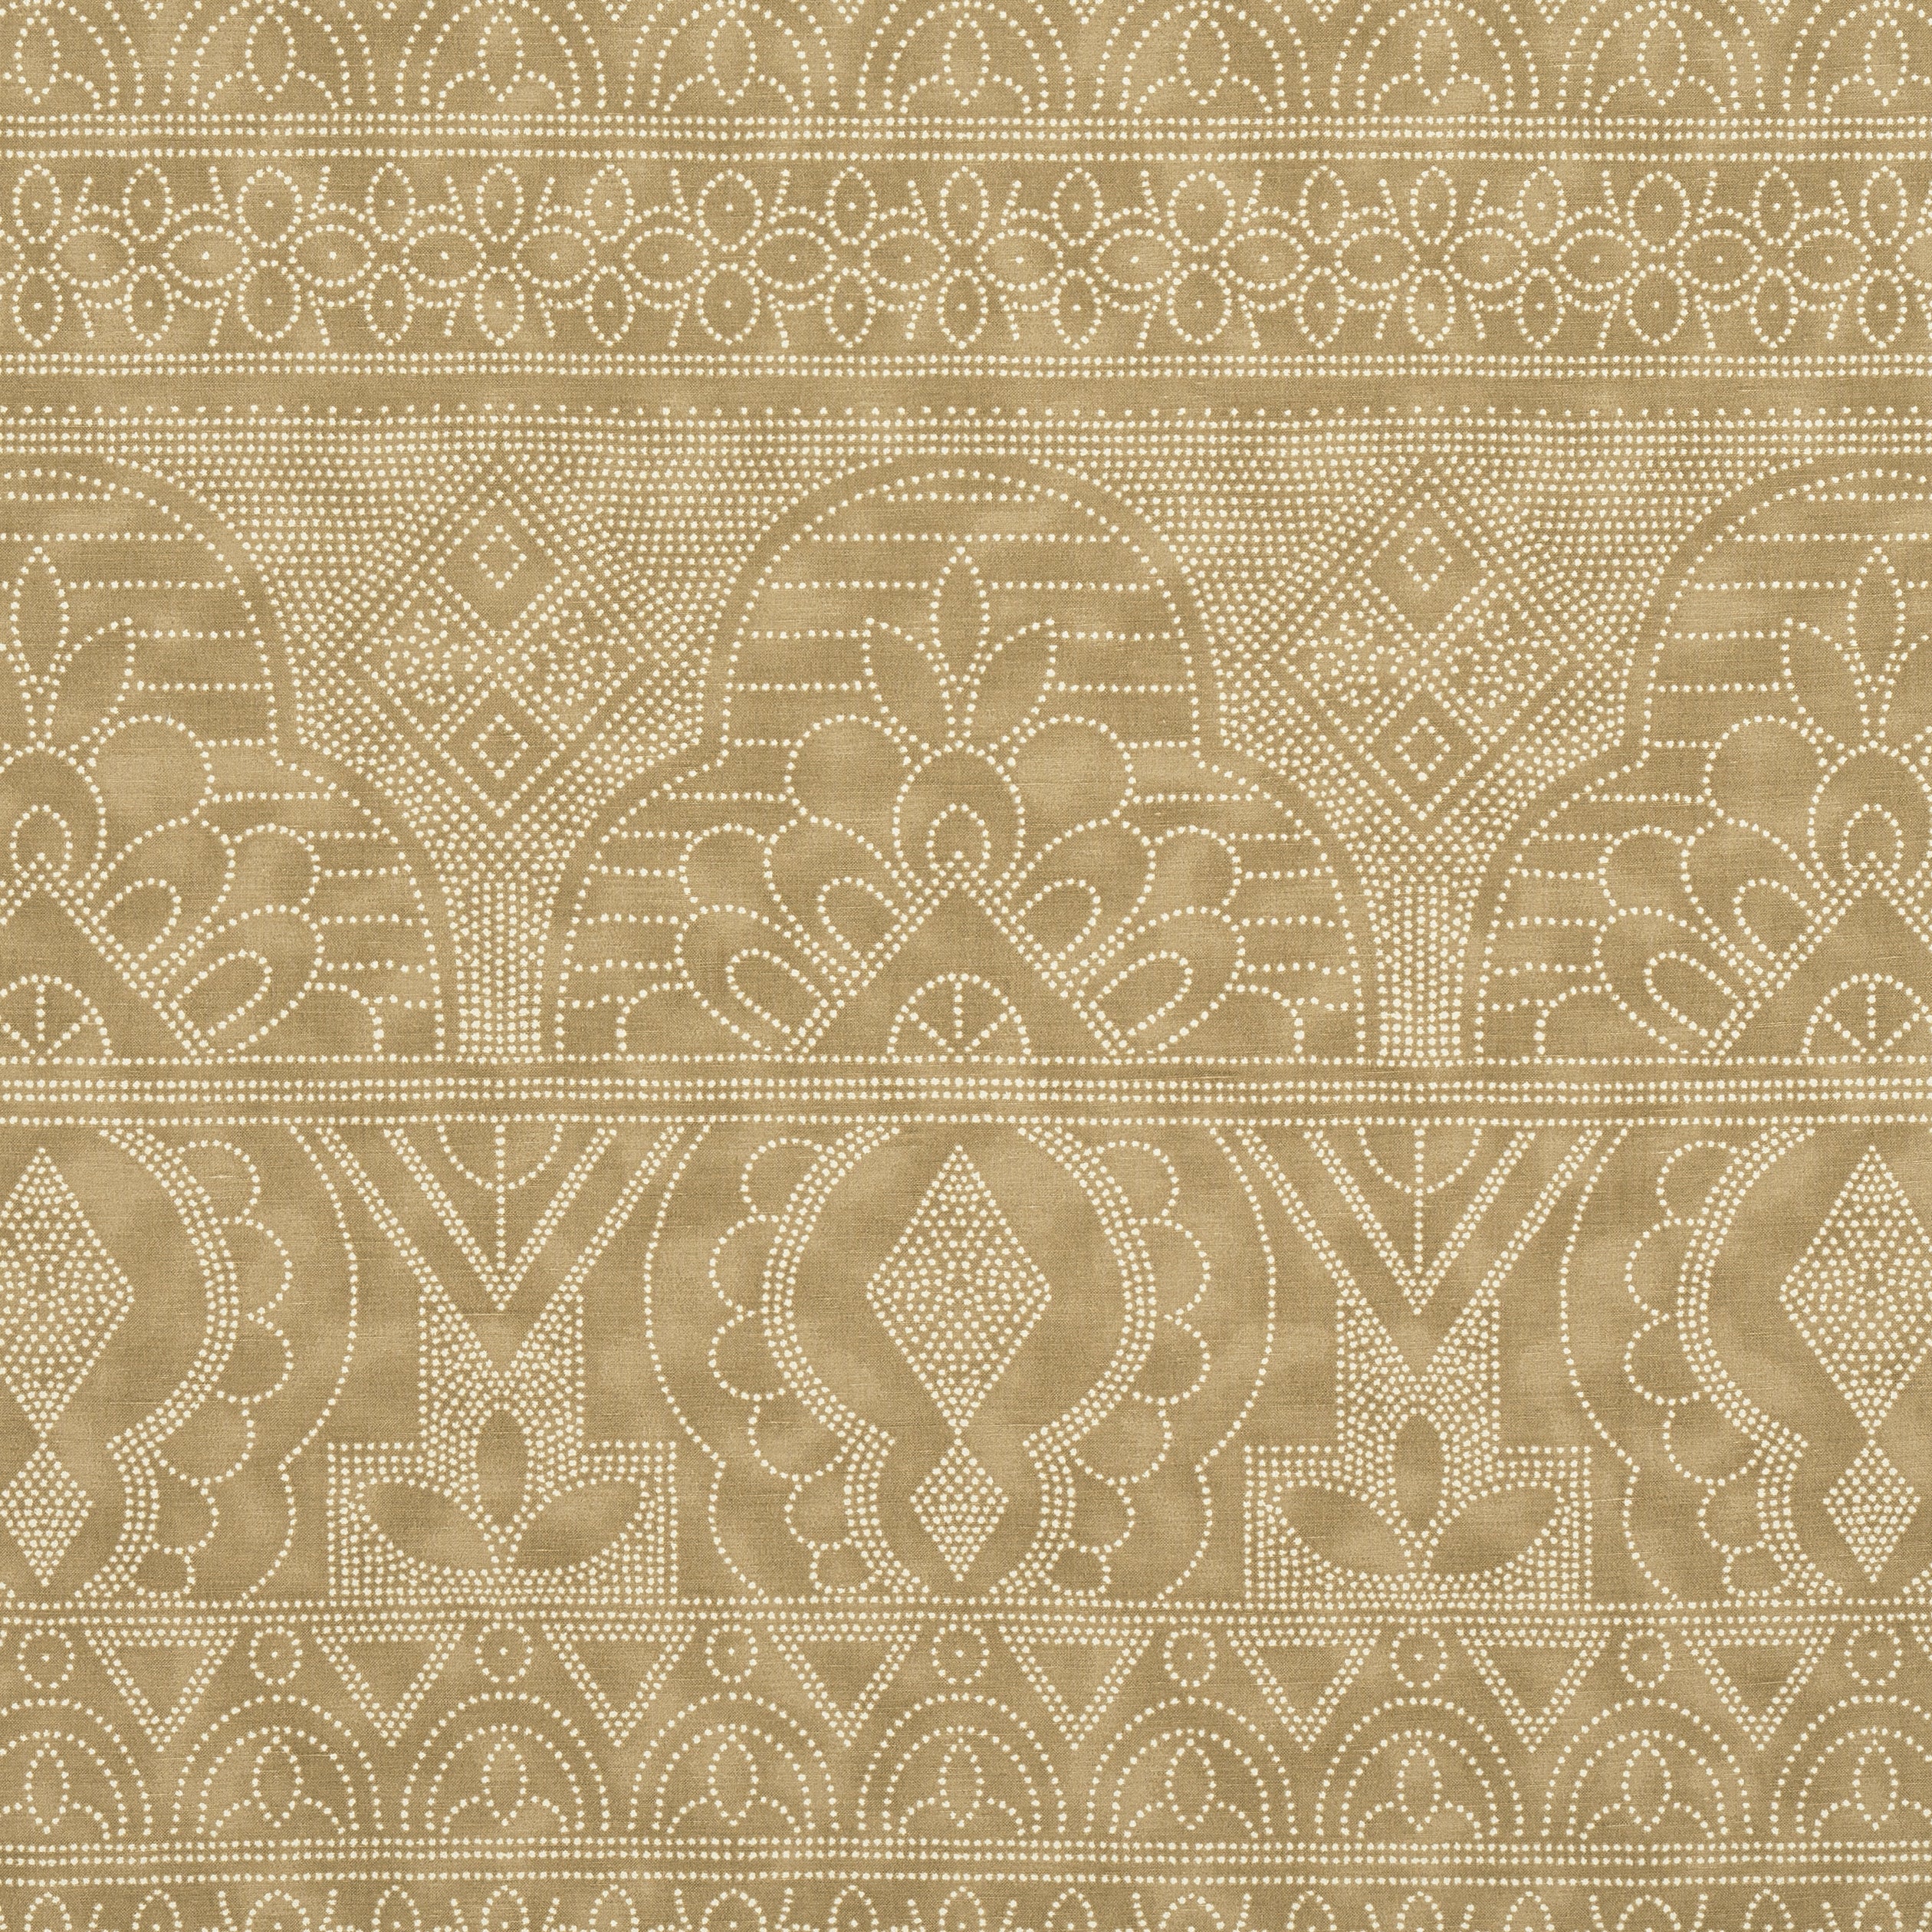 Medinas fabric in camel color - pattern number F981301 - by Thibaut in the Montecito collection